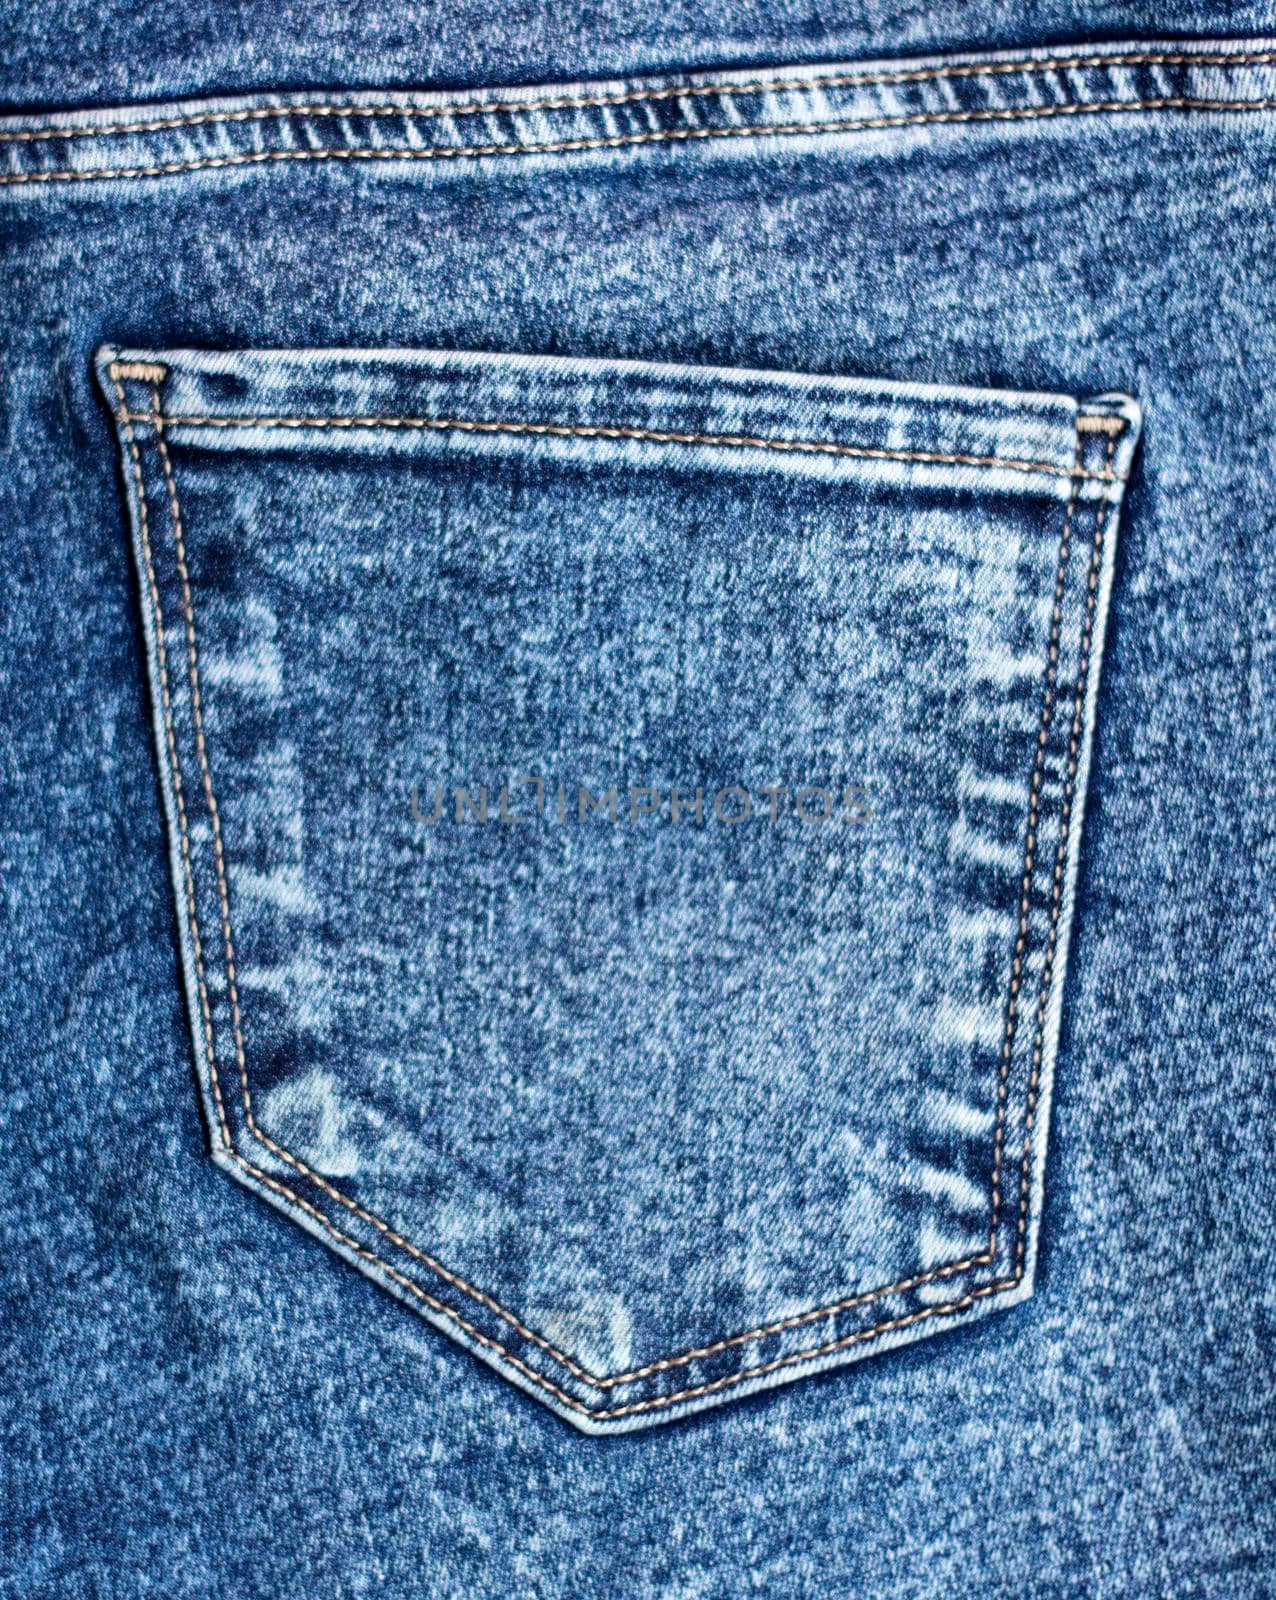 back pocket on jeans. Denim fabric texture. Sewn-in pocket, empty. High quality photo